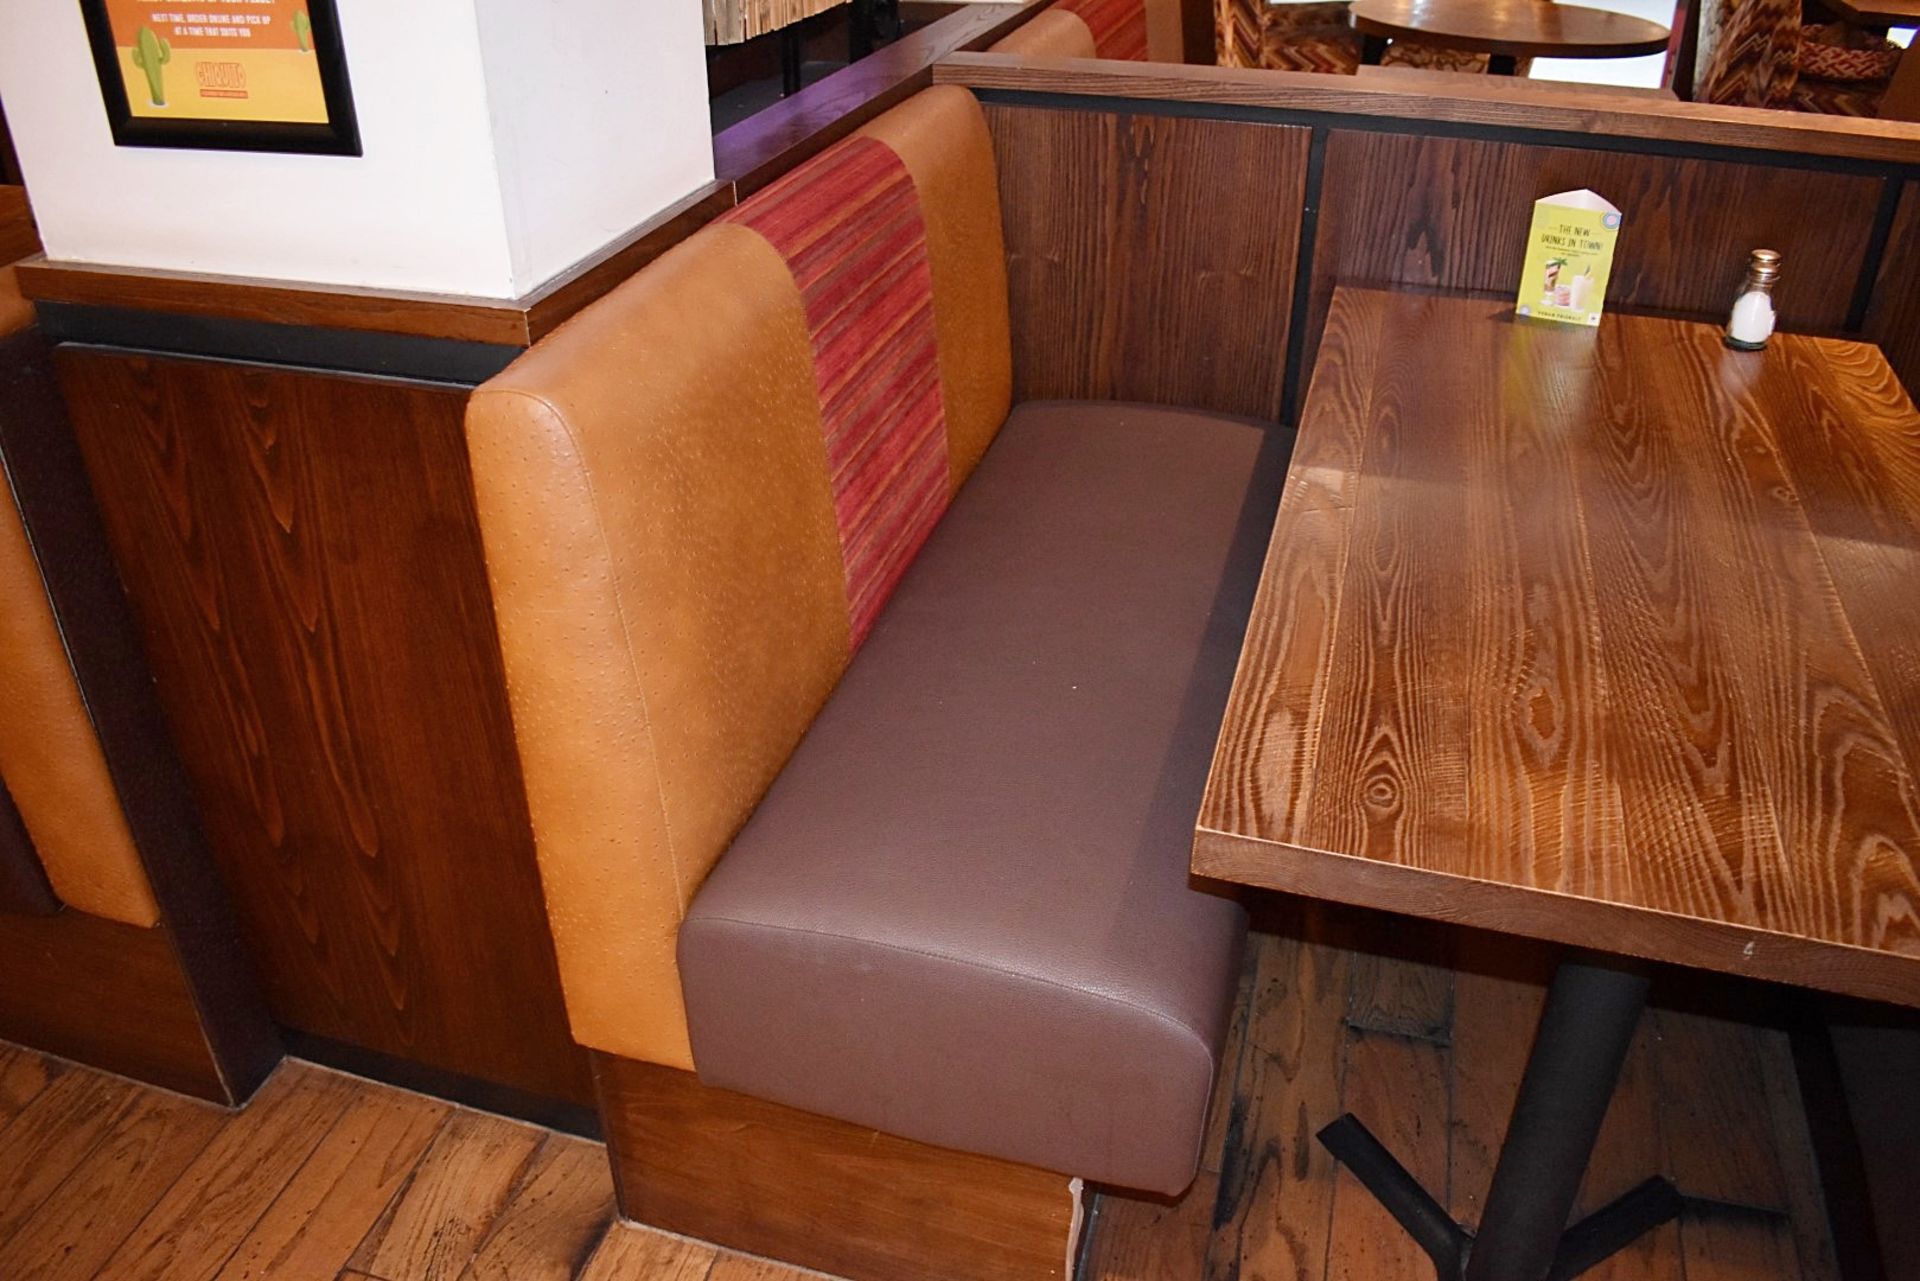 15-Pieces Of Restaurant Booth Seating Of Varying Length - Image 19 of 22